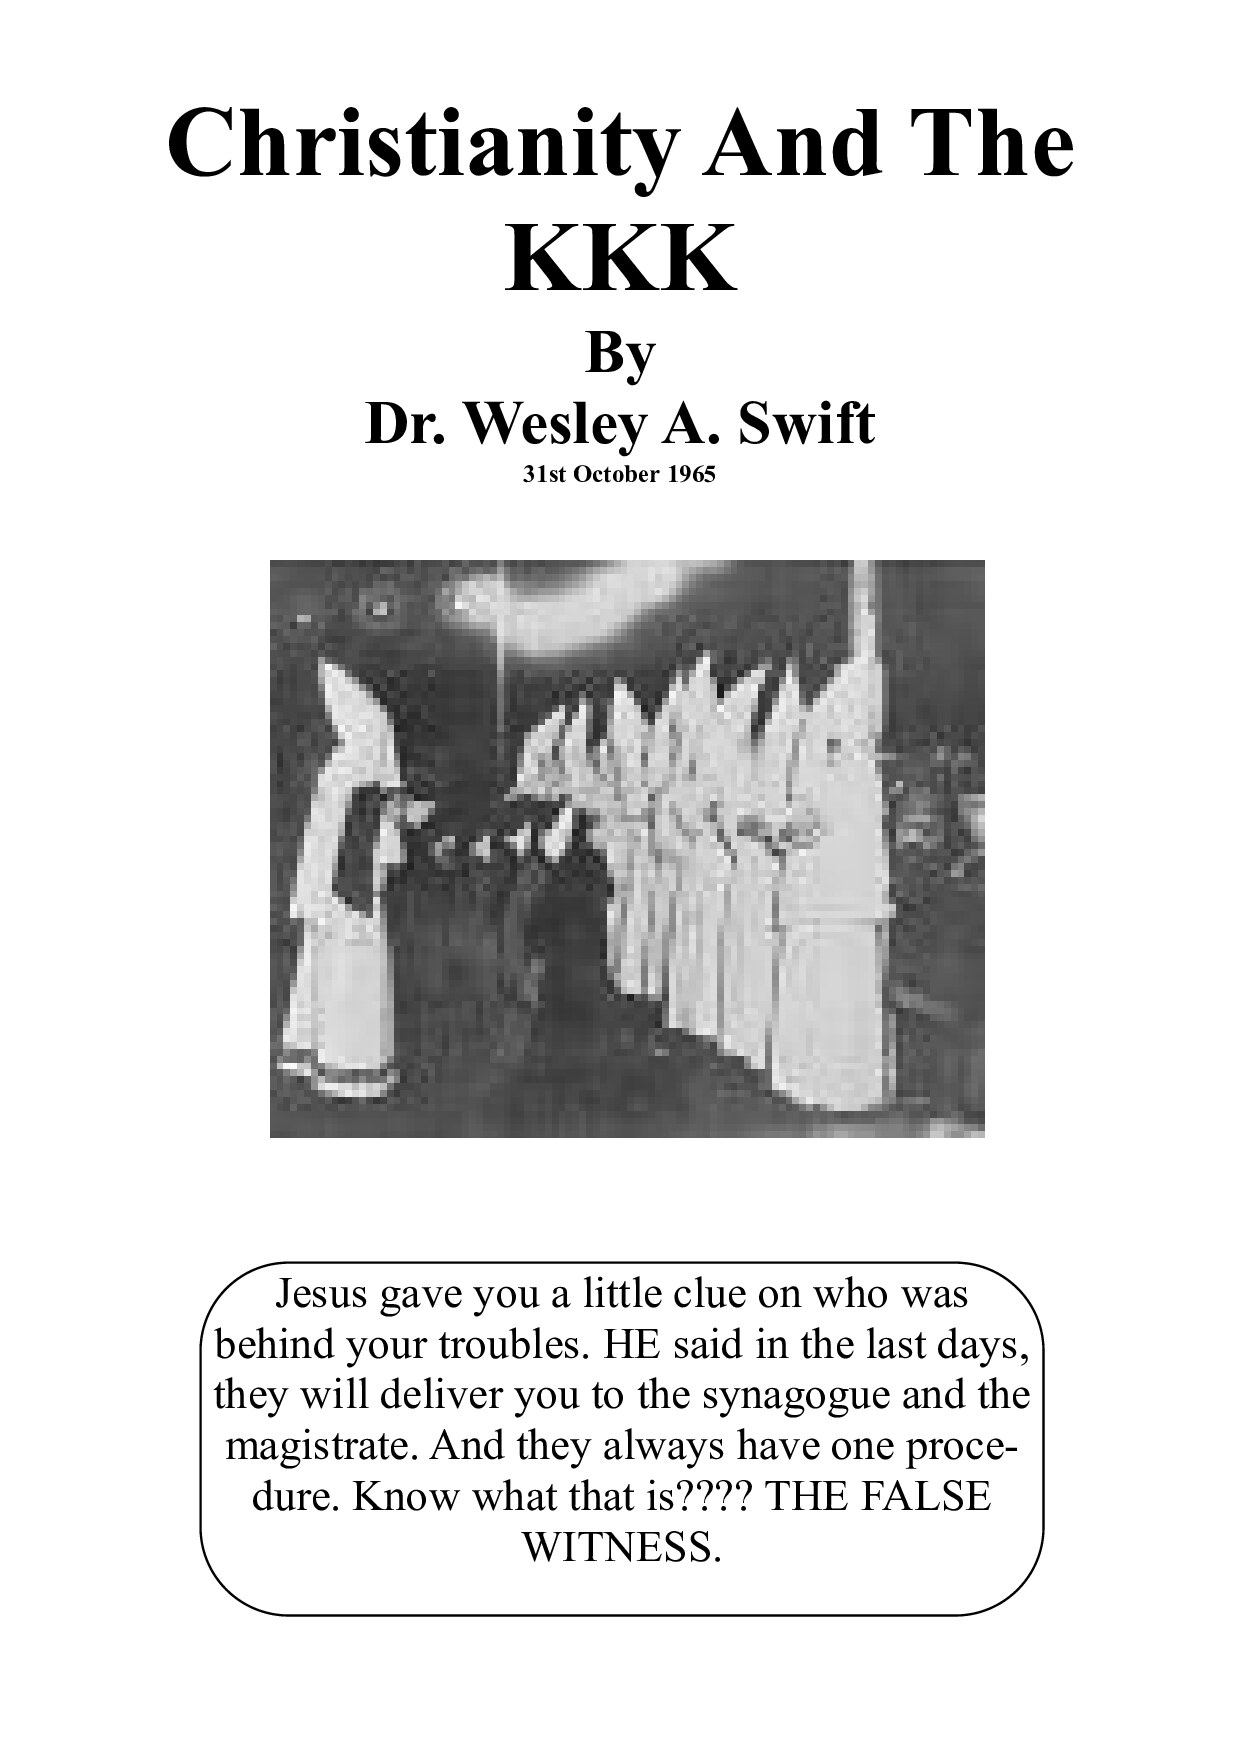 Christianity and The KKK